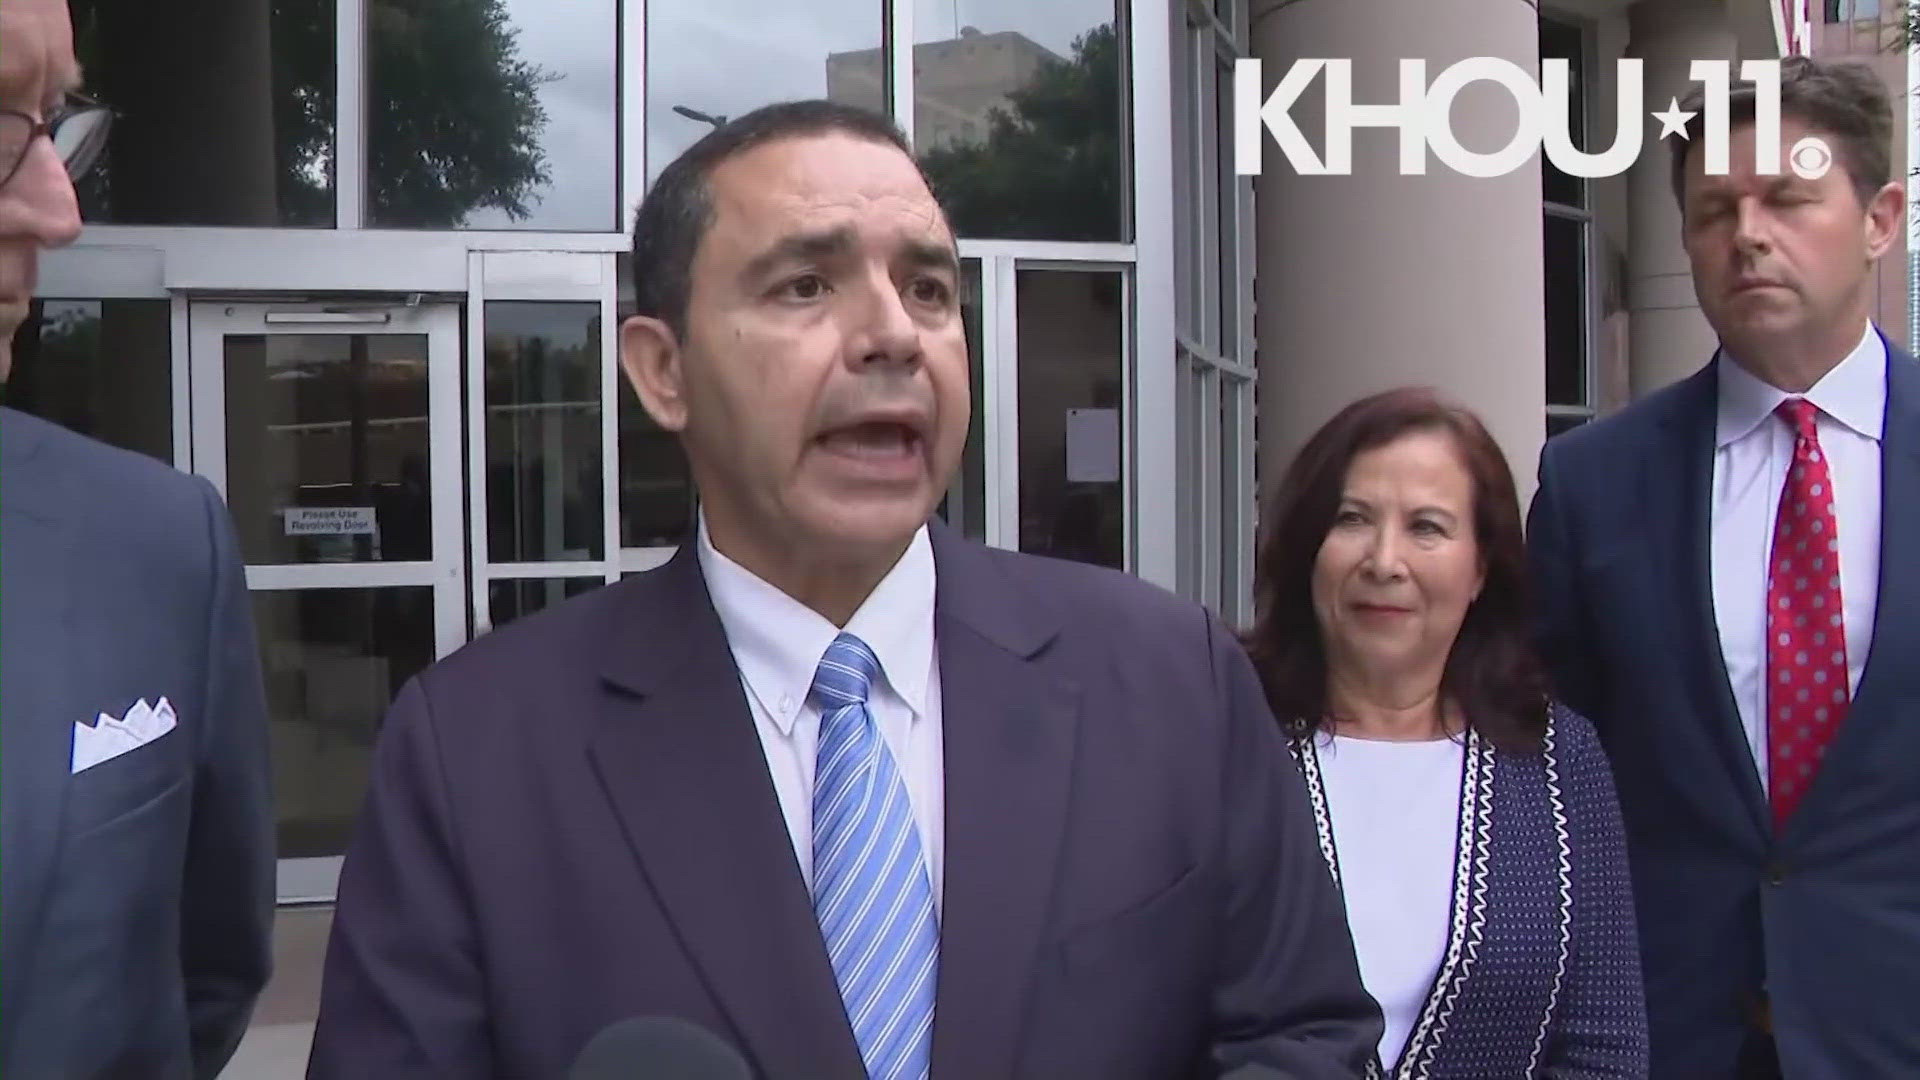 An indictment accused Cuellar and his wife of conducting a scheme over a period of years to get bribes from an Azerbaijan oil company and a bank in Mexico.